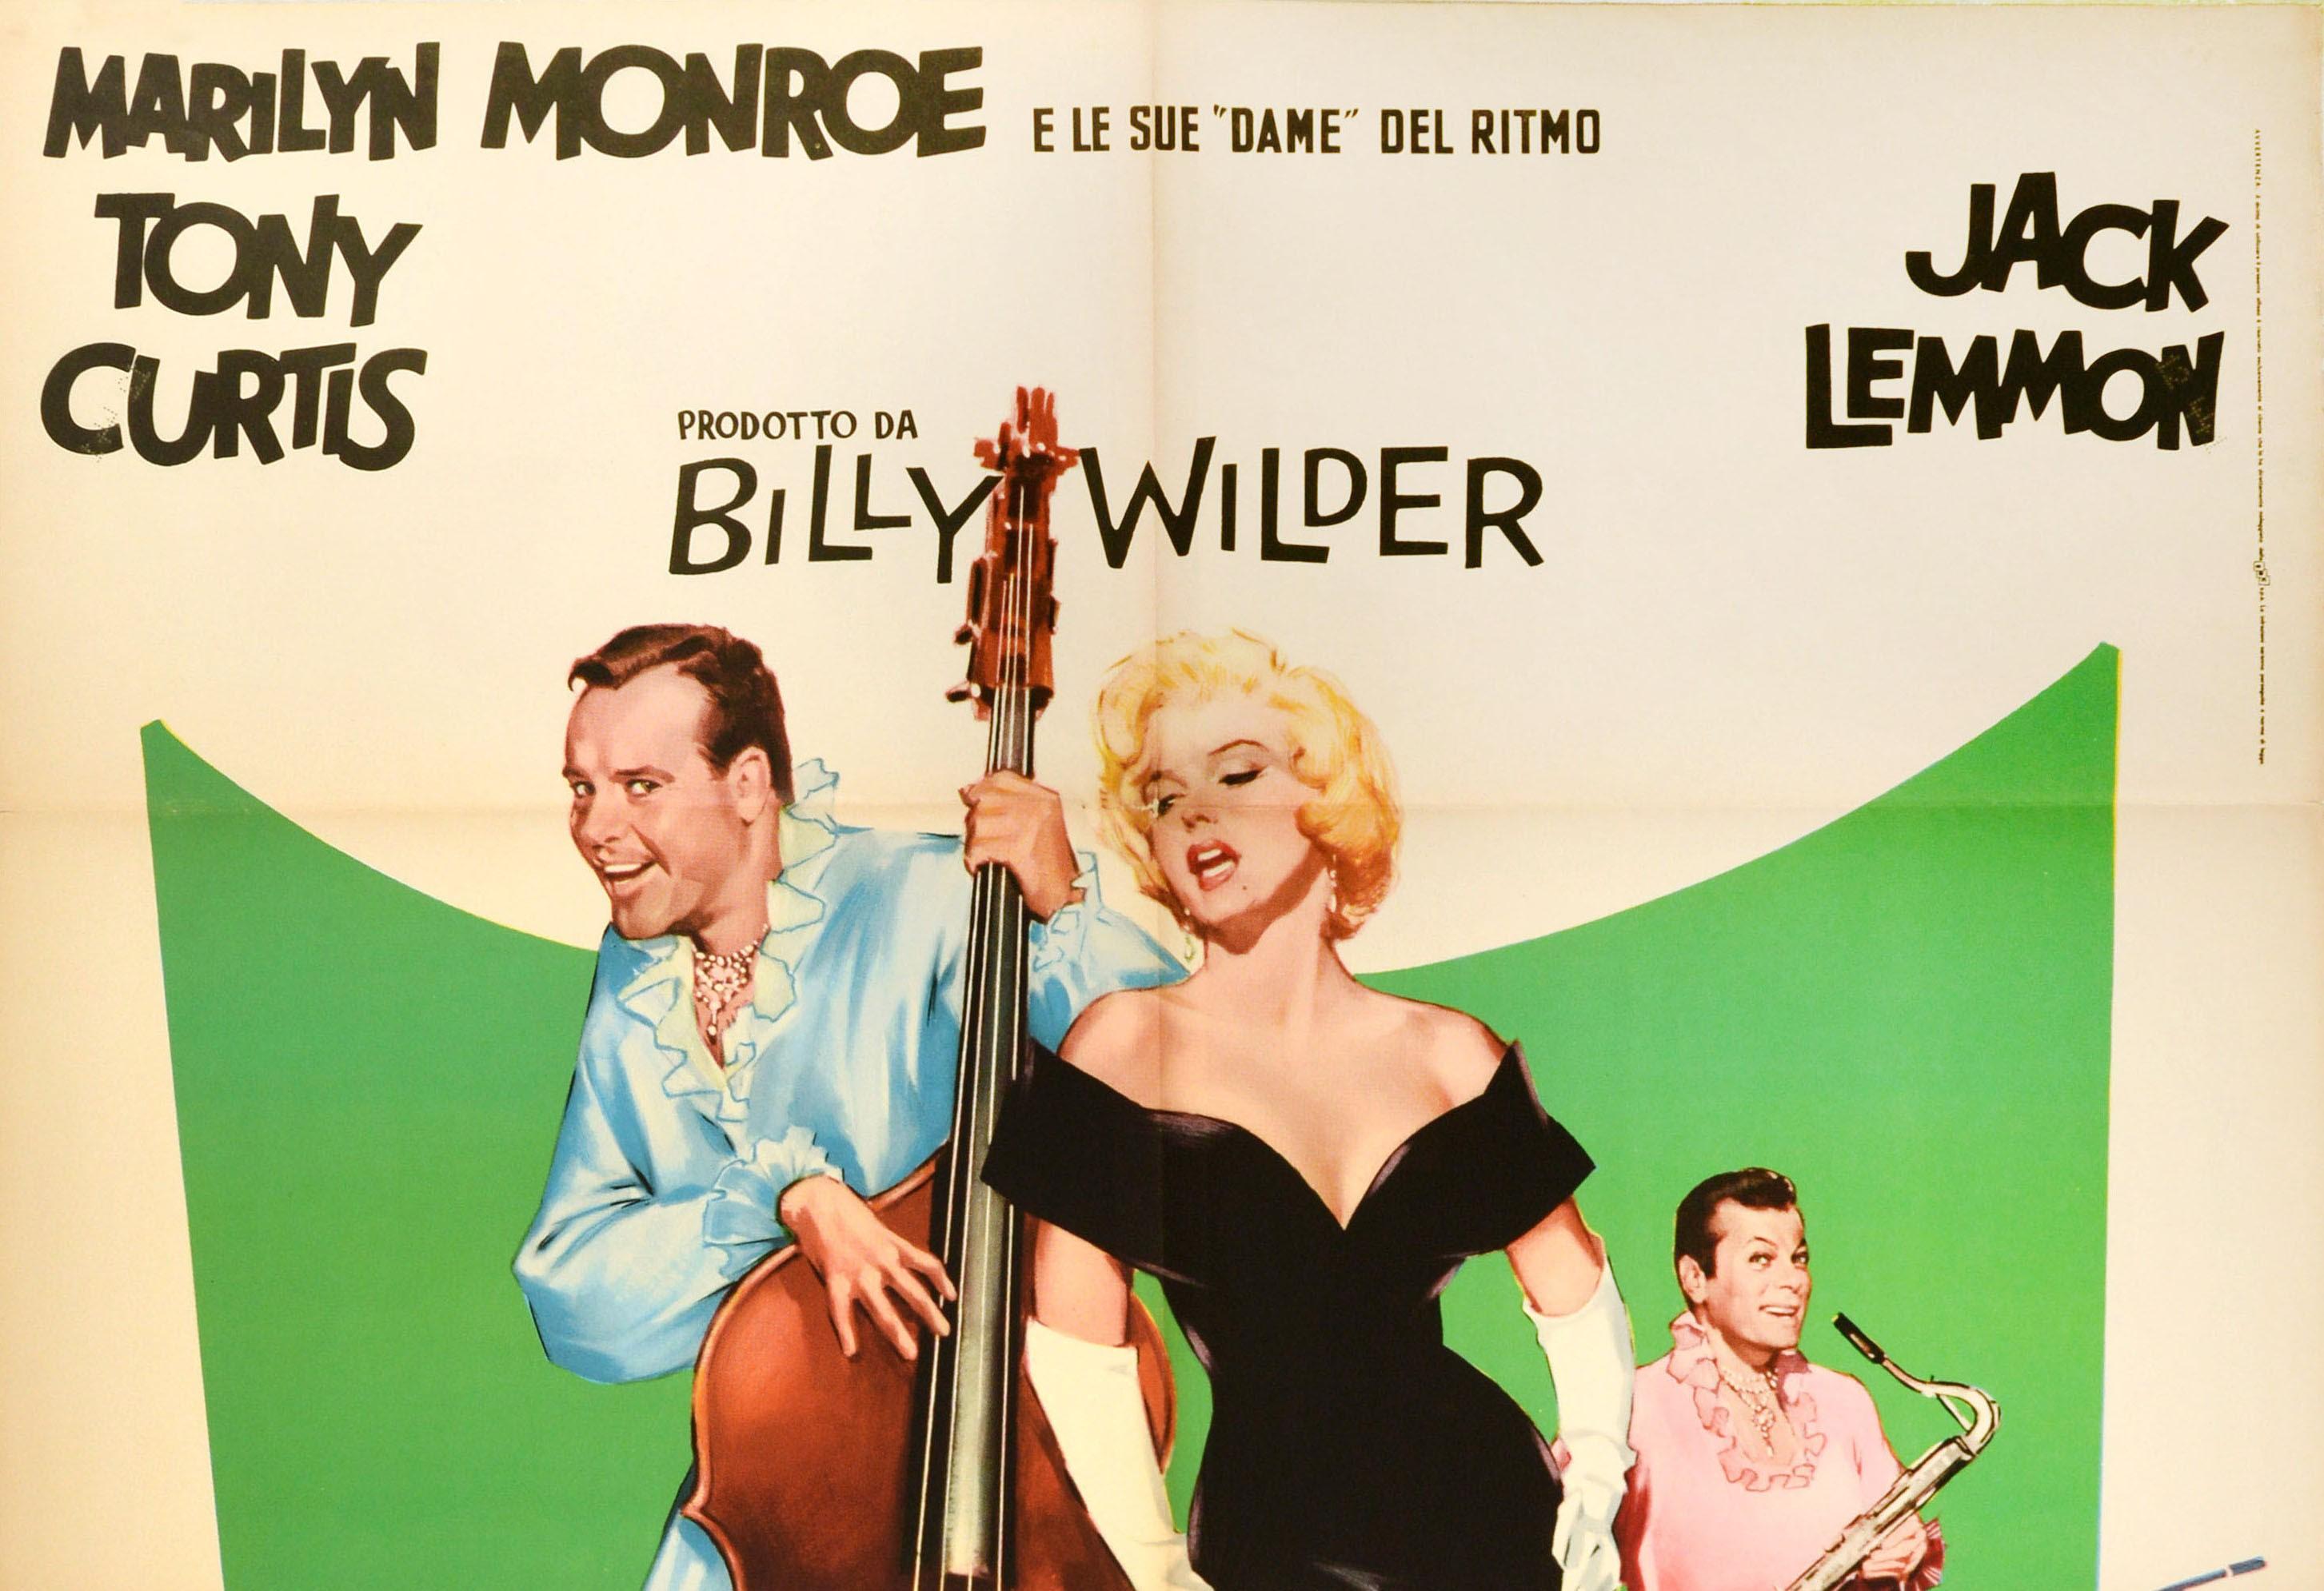 Original vintage movie poster for the award winning musical comedy film Some Like It Hot / A Qualcuno Piace Caldo directed by Billy Wilder and starring Marilyn Monroe, Tony Curtis and Jack Lemmon featuring Sugar Kane Kowalczyk played by Monroe in an